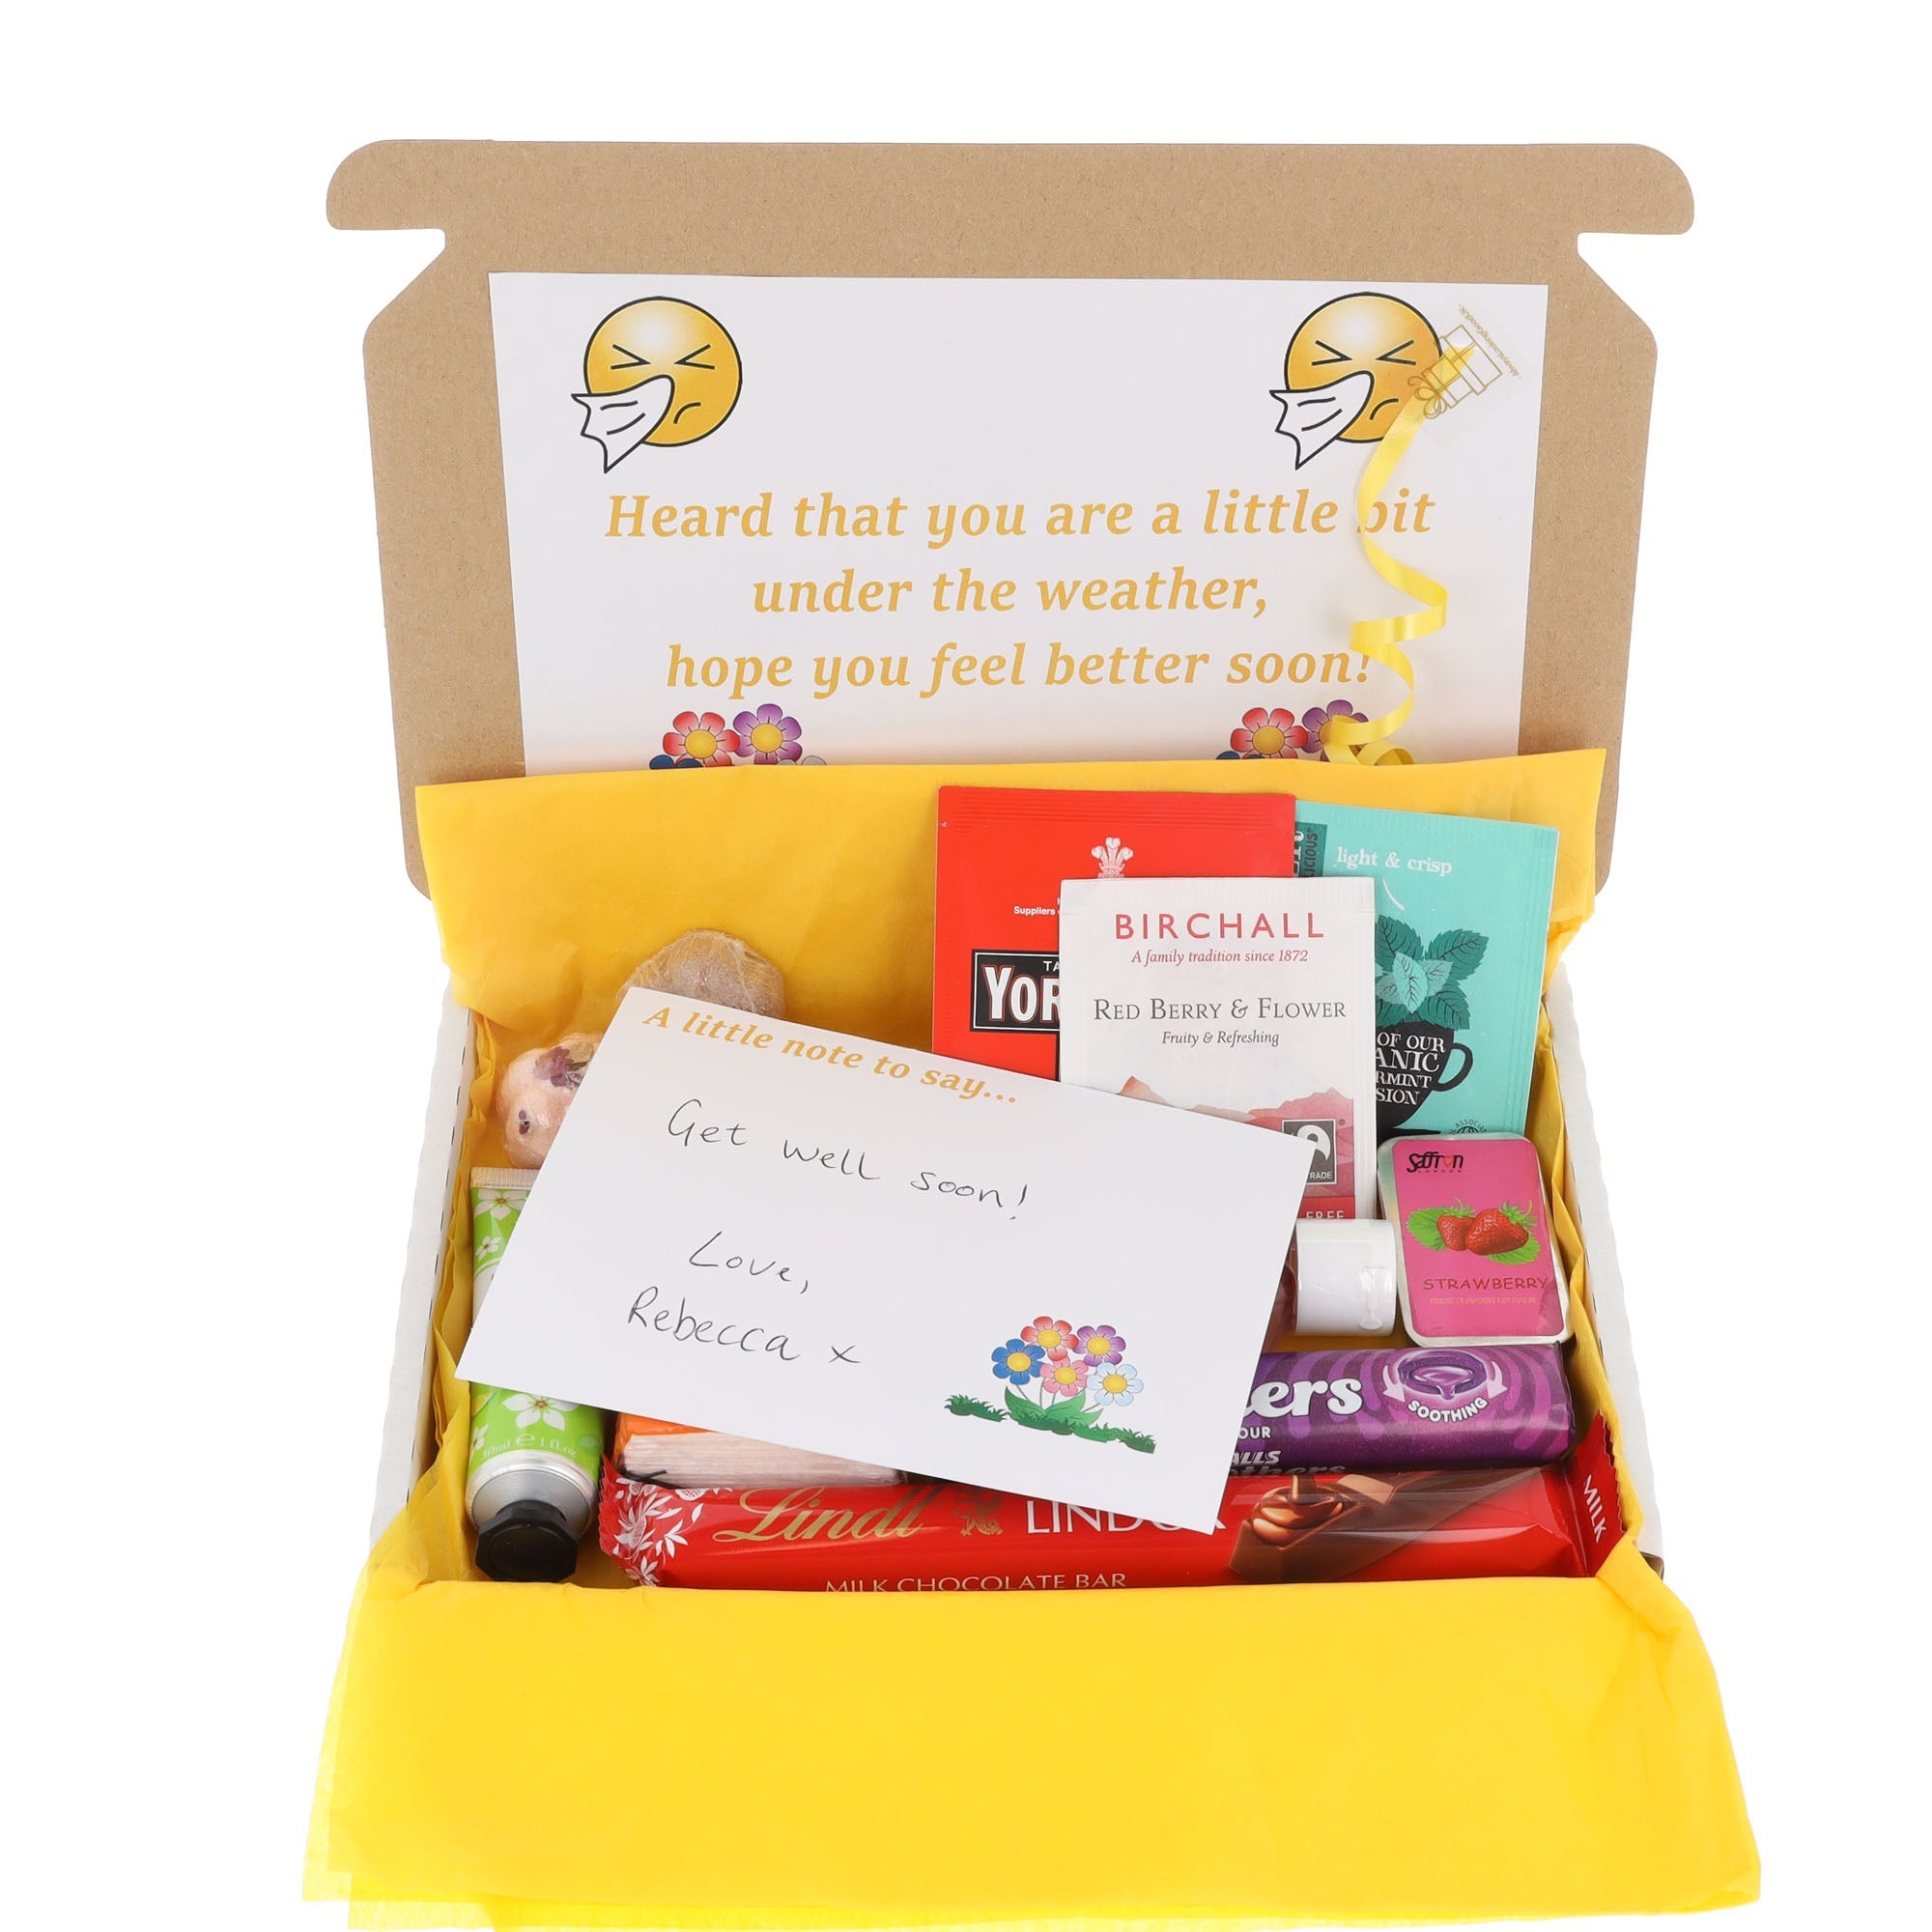 Get Well Soon Gifts | Deliver Kosher